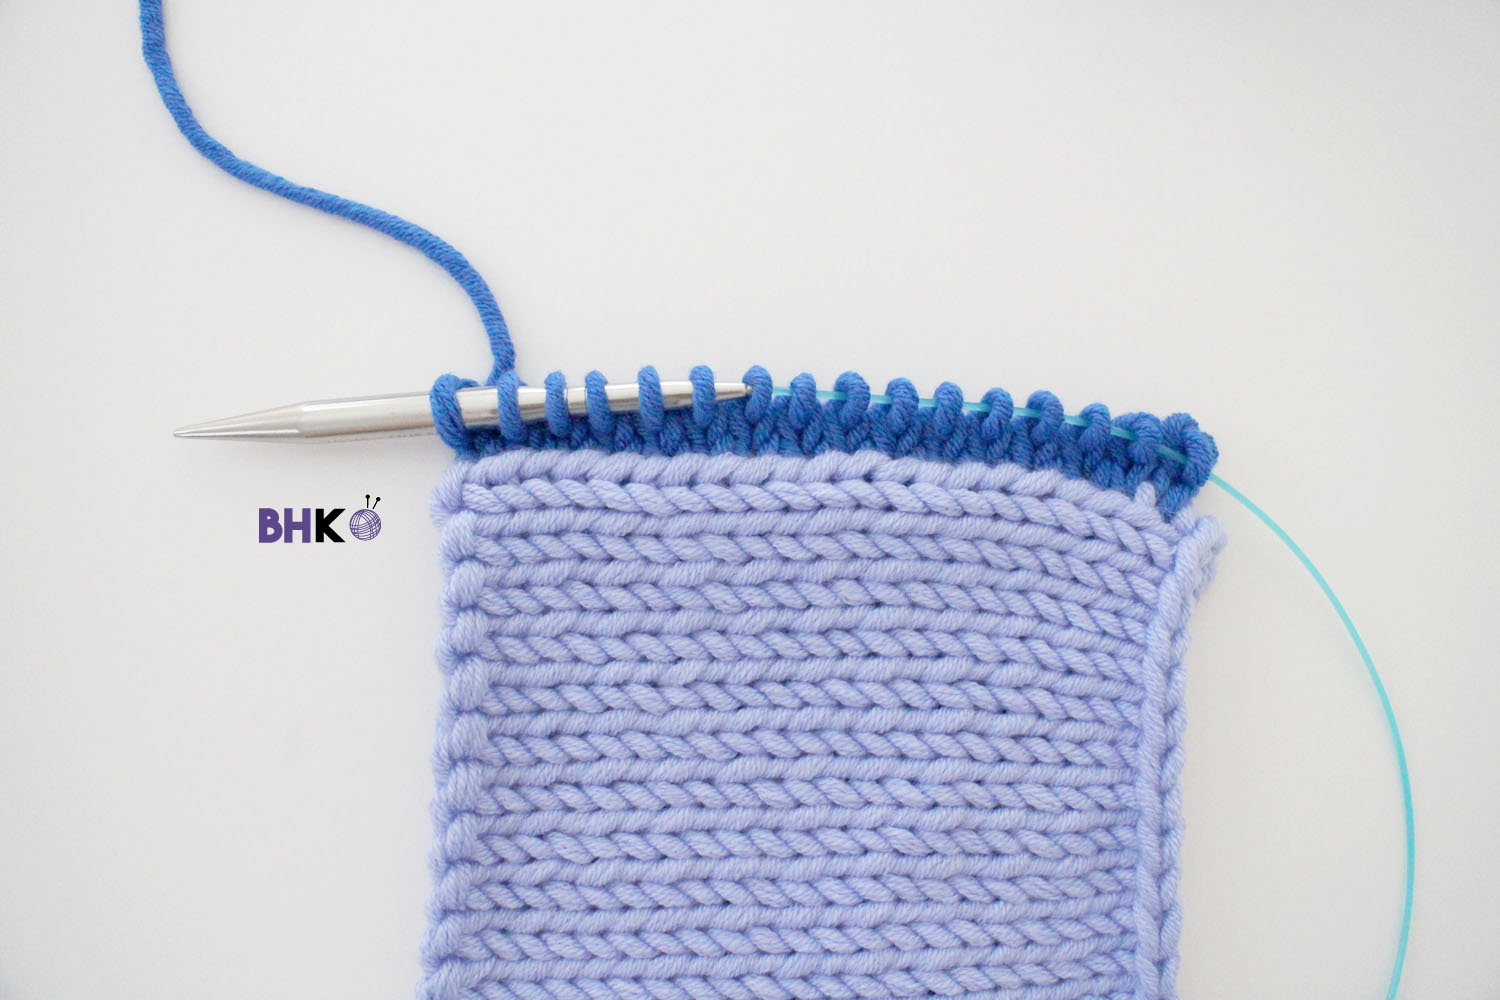 How to Pick Up and Knit on Stockinette Stitch